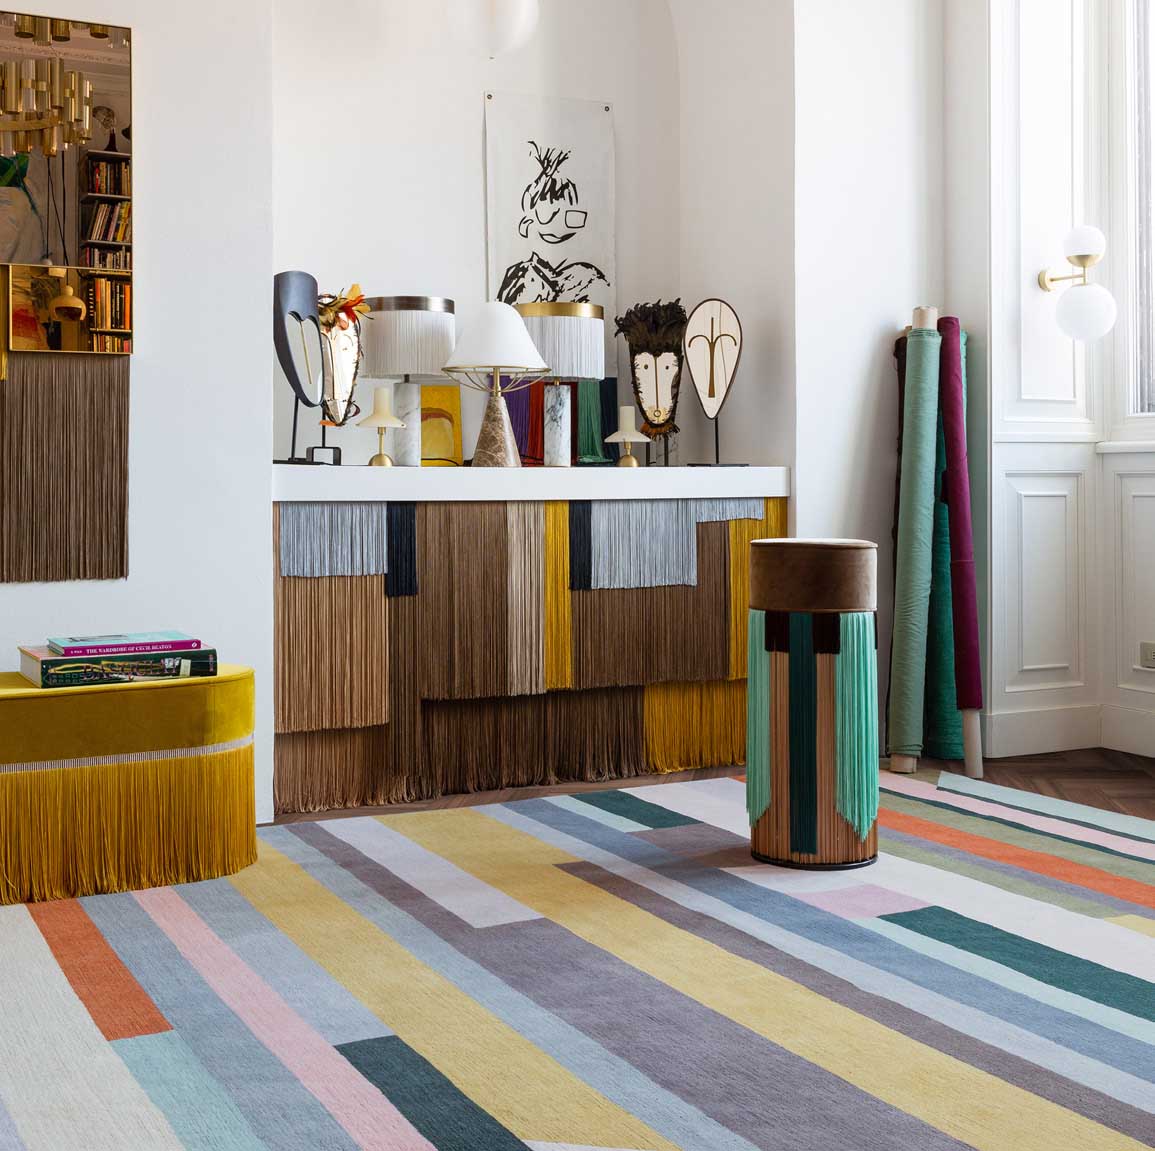 Interval rug by Paul Smith